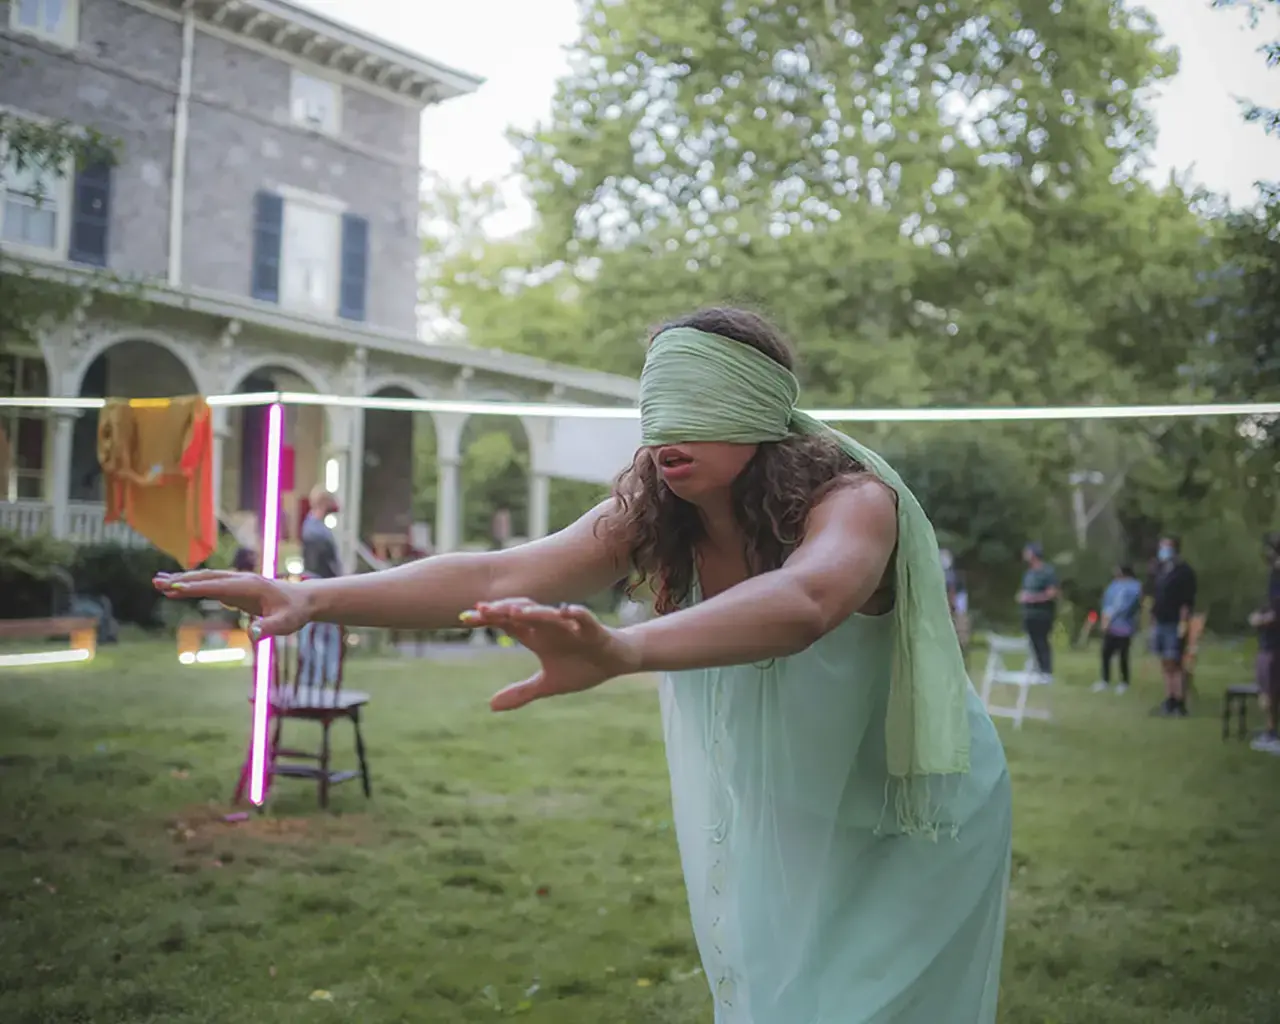 A performer wears a seafoam colored blindfold and gauzy blue dress. Their arms are extended and searching.